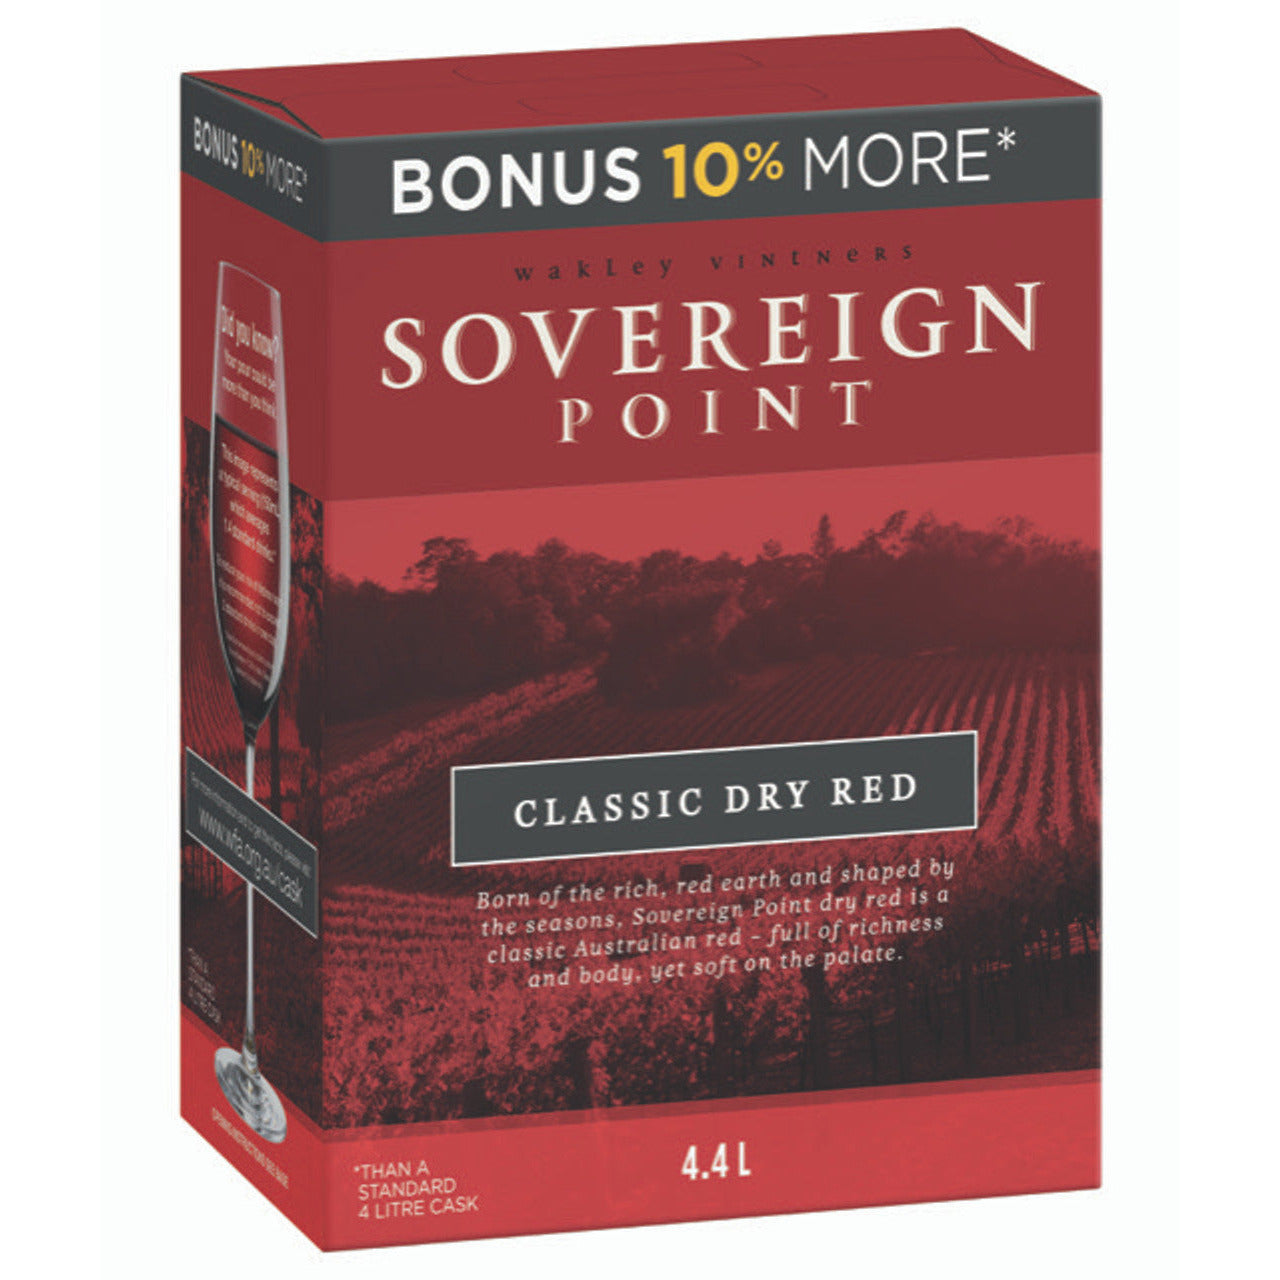 Sovereign Point Classic Dry Red